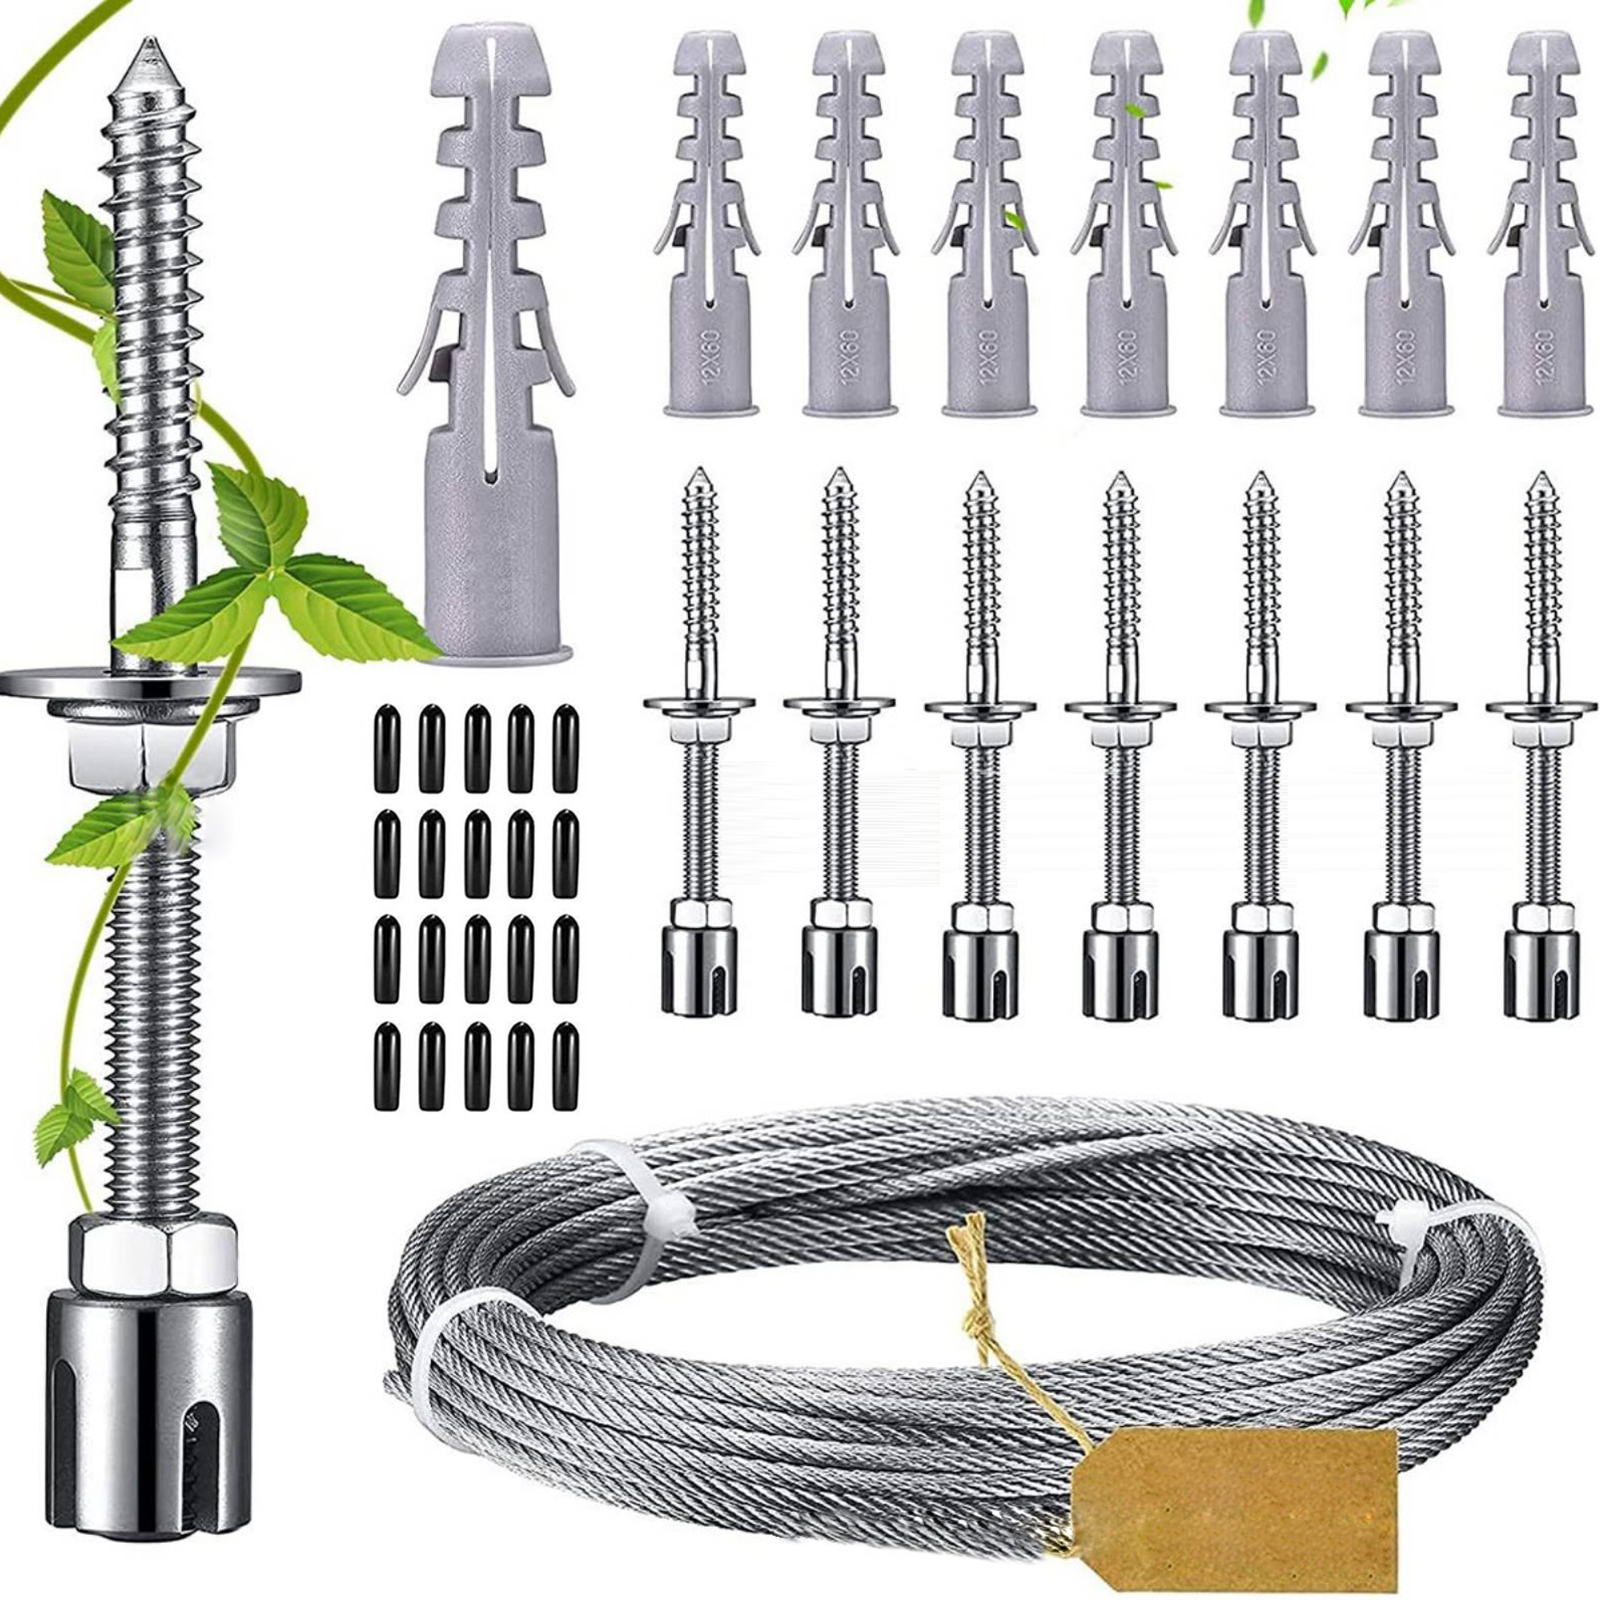 37pcs Stainless Steel Trellis For Climbing Plants System Complete Set for Wire Rope Cable Garden Vines Green Walls